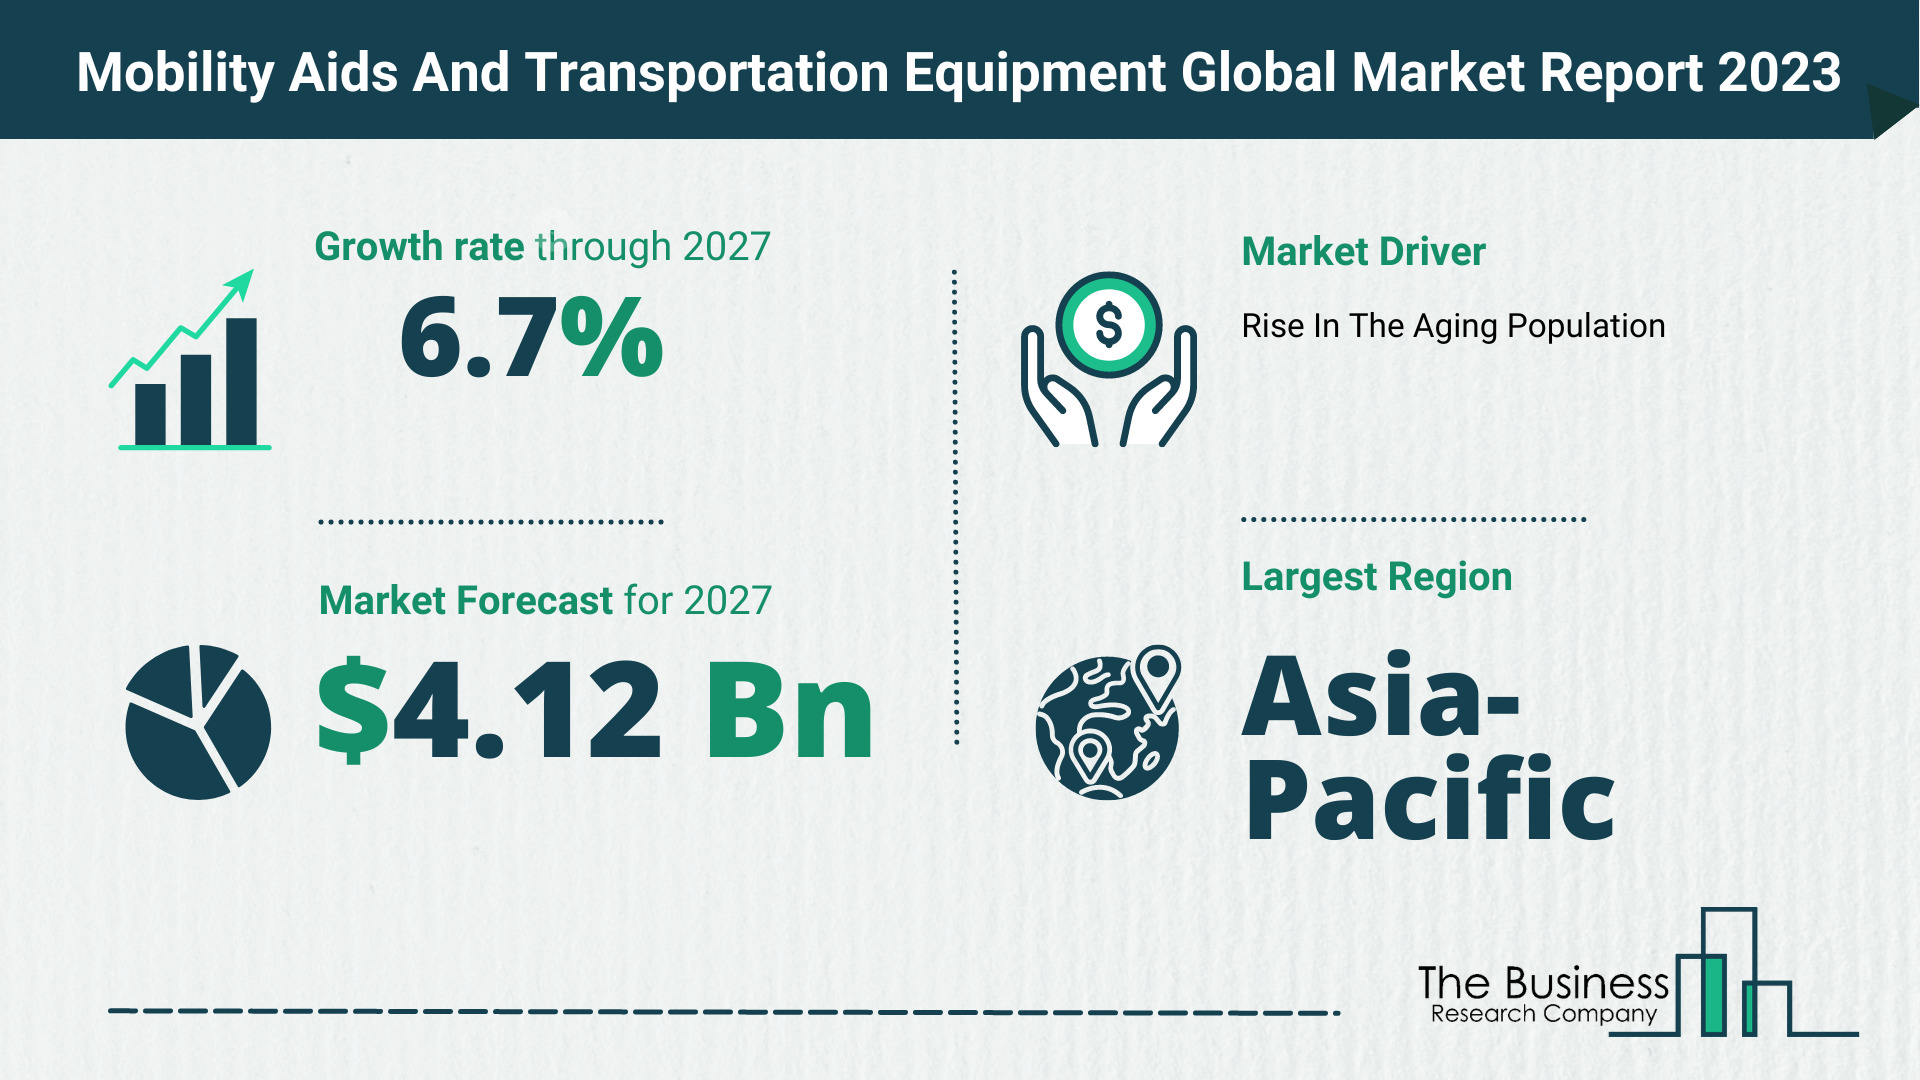 Global Mobility Aids And Transportation Equipment Market Opportunities And Strategies 2023